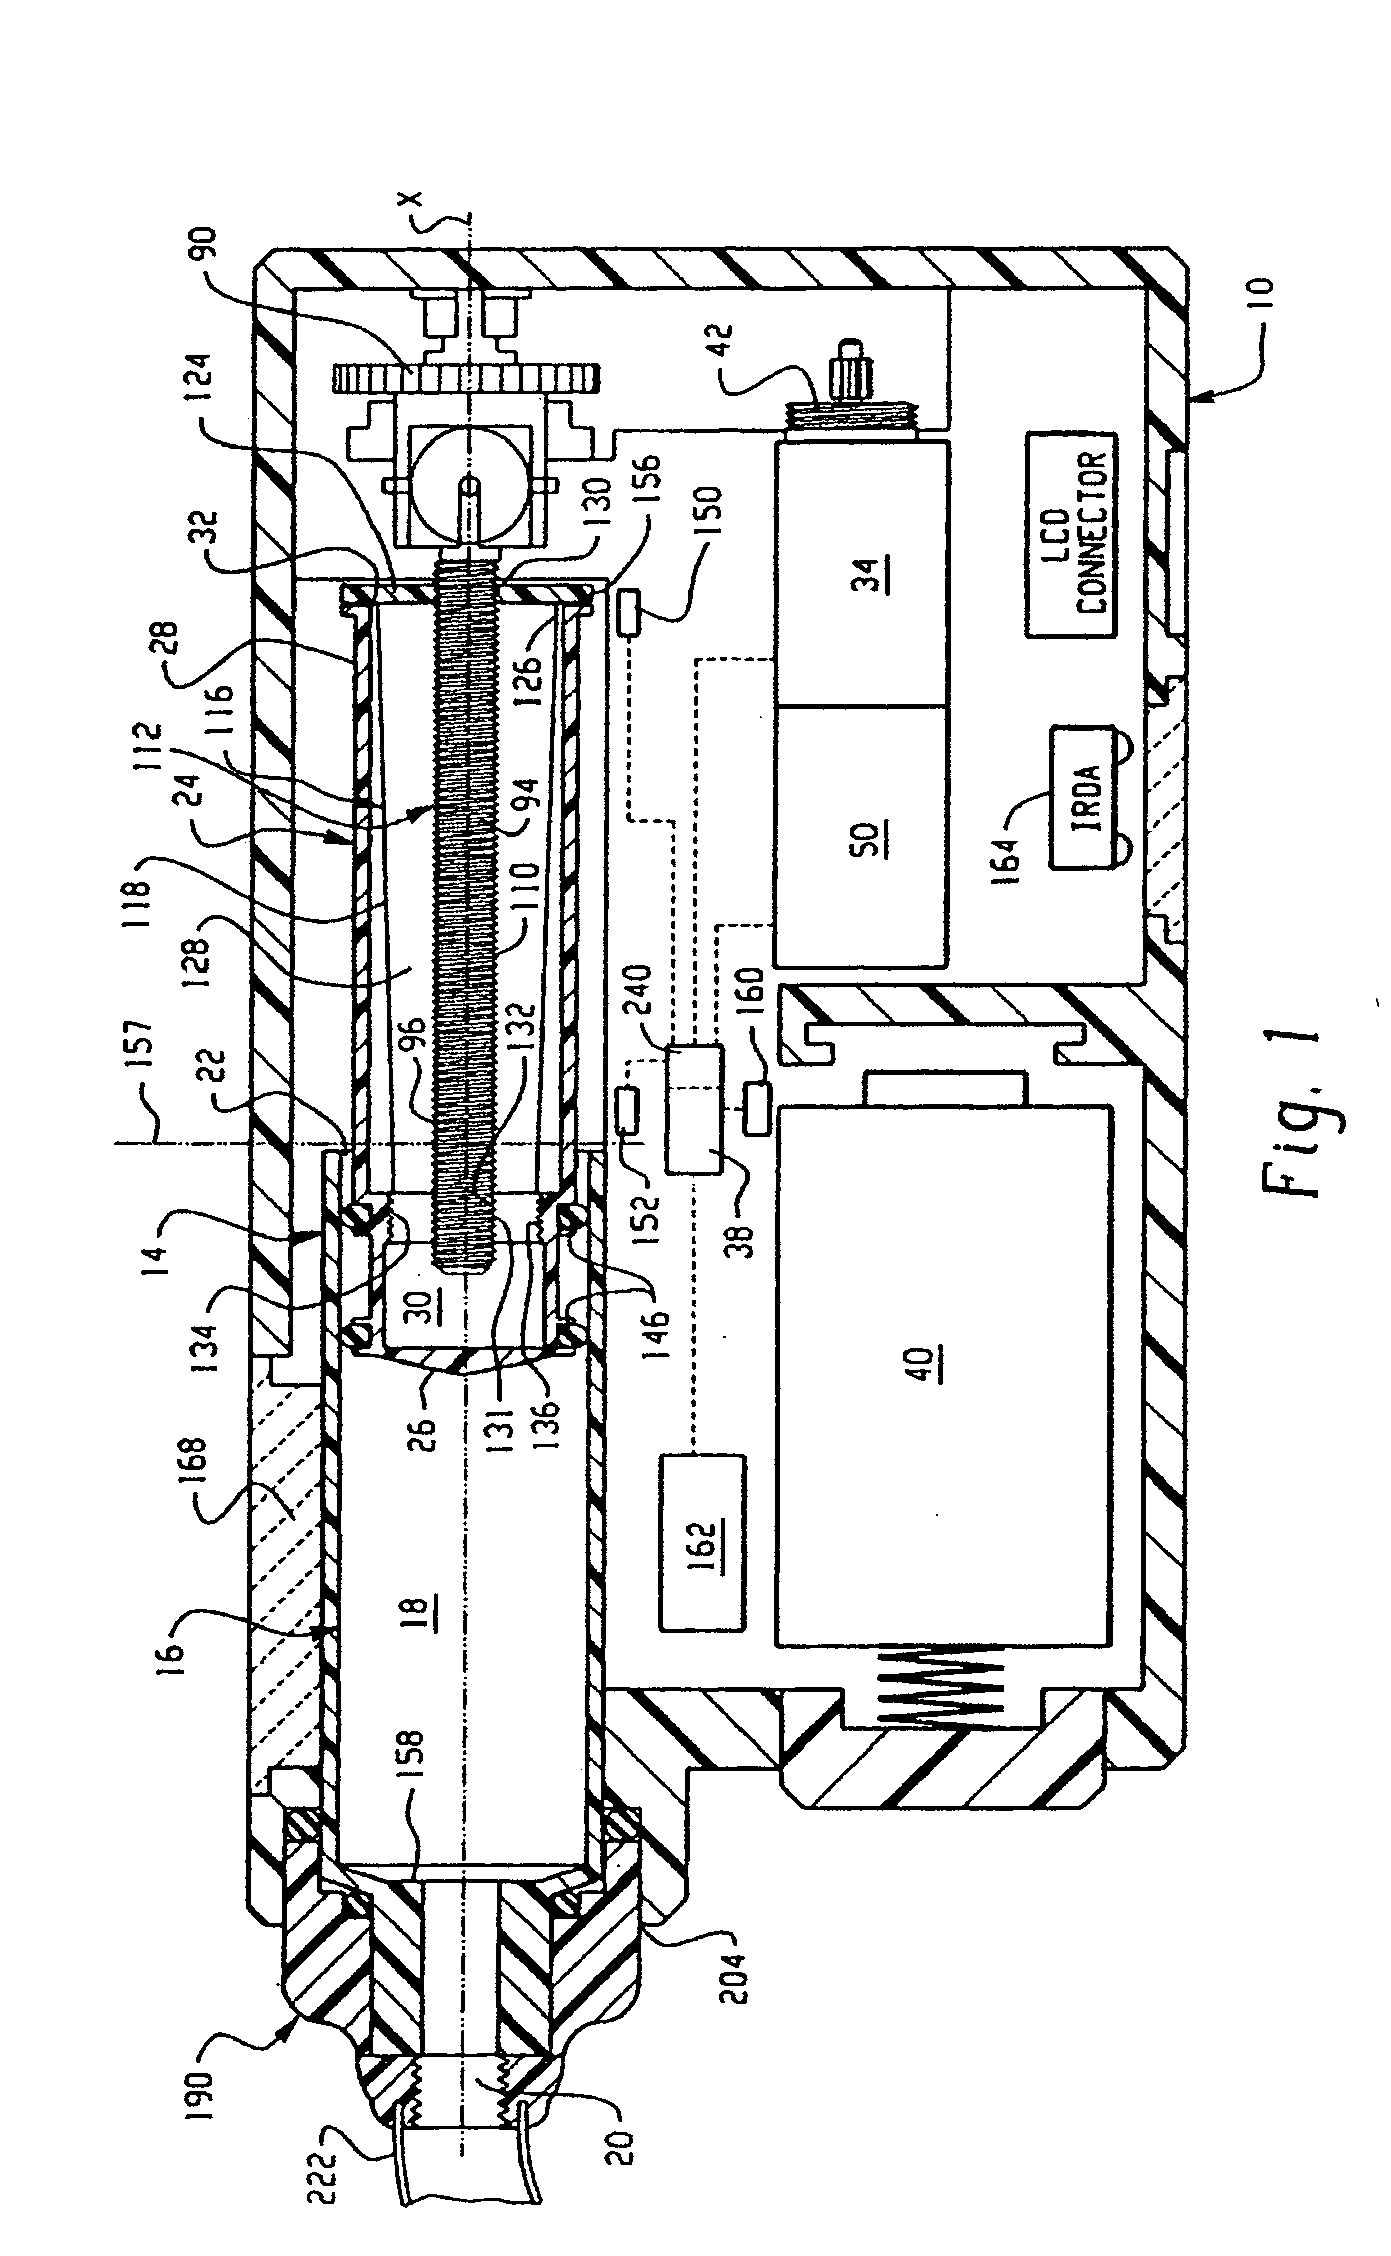 Drive system for an infusion pump